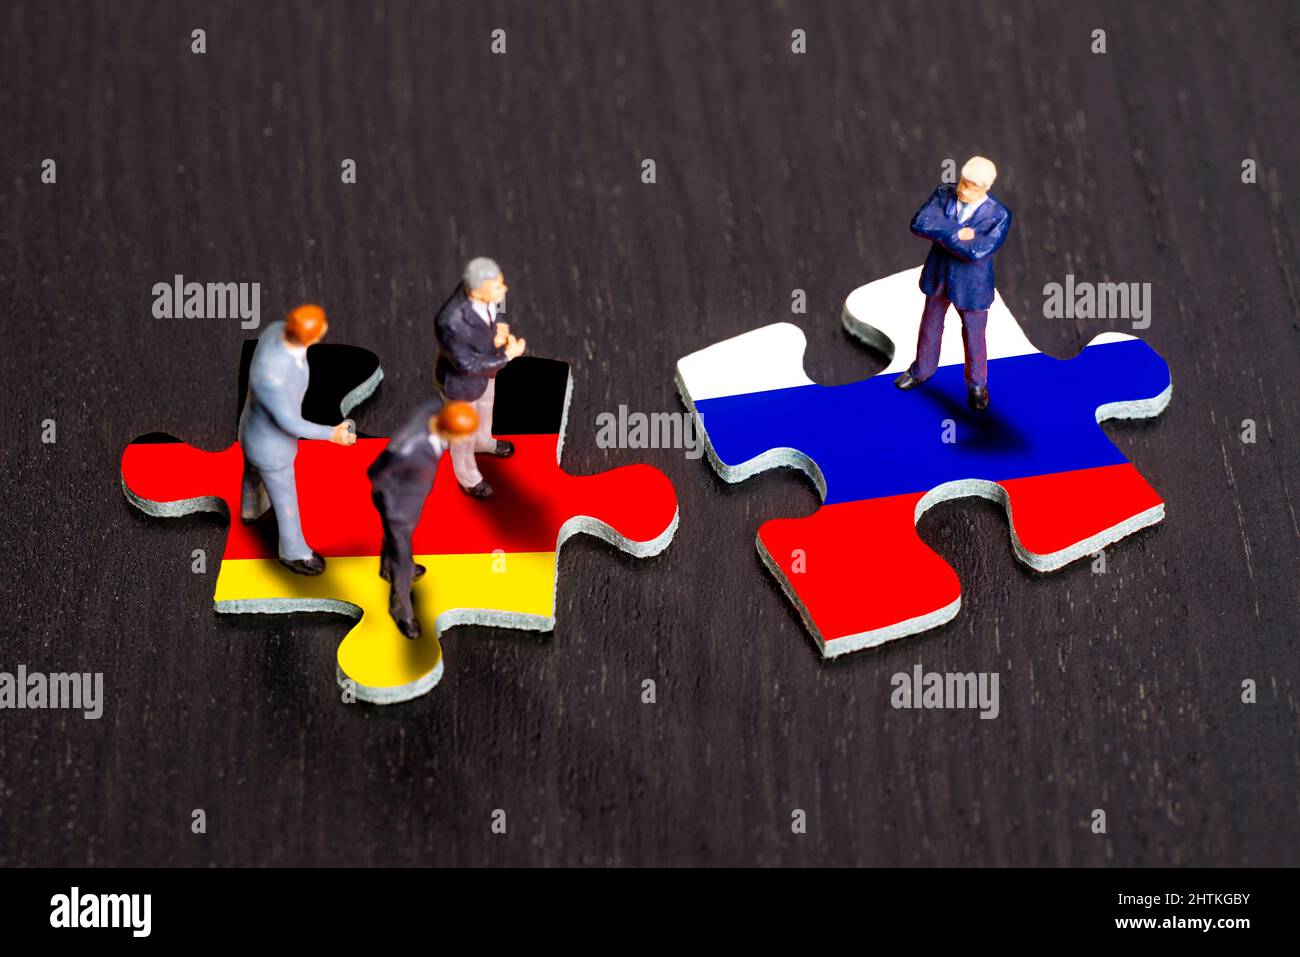 Puzzle pieces with the flags of Germany and Russia Stock Photo